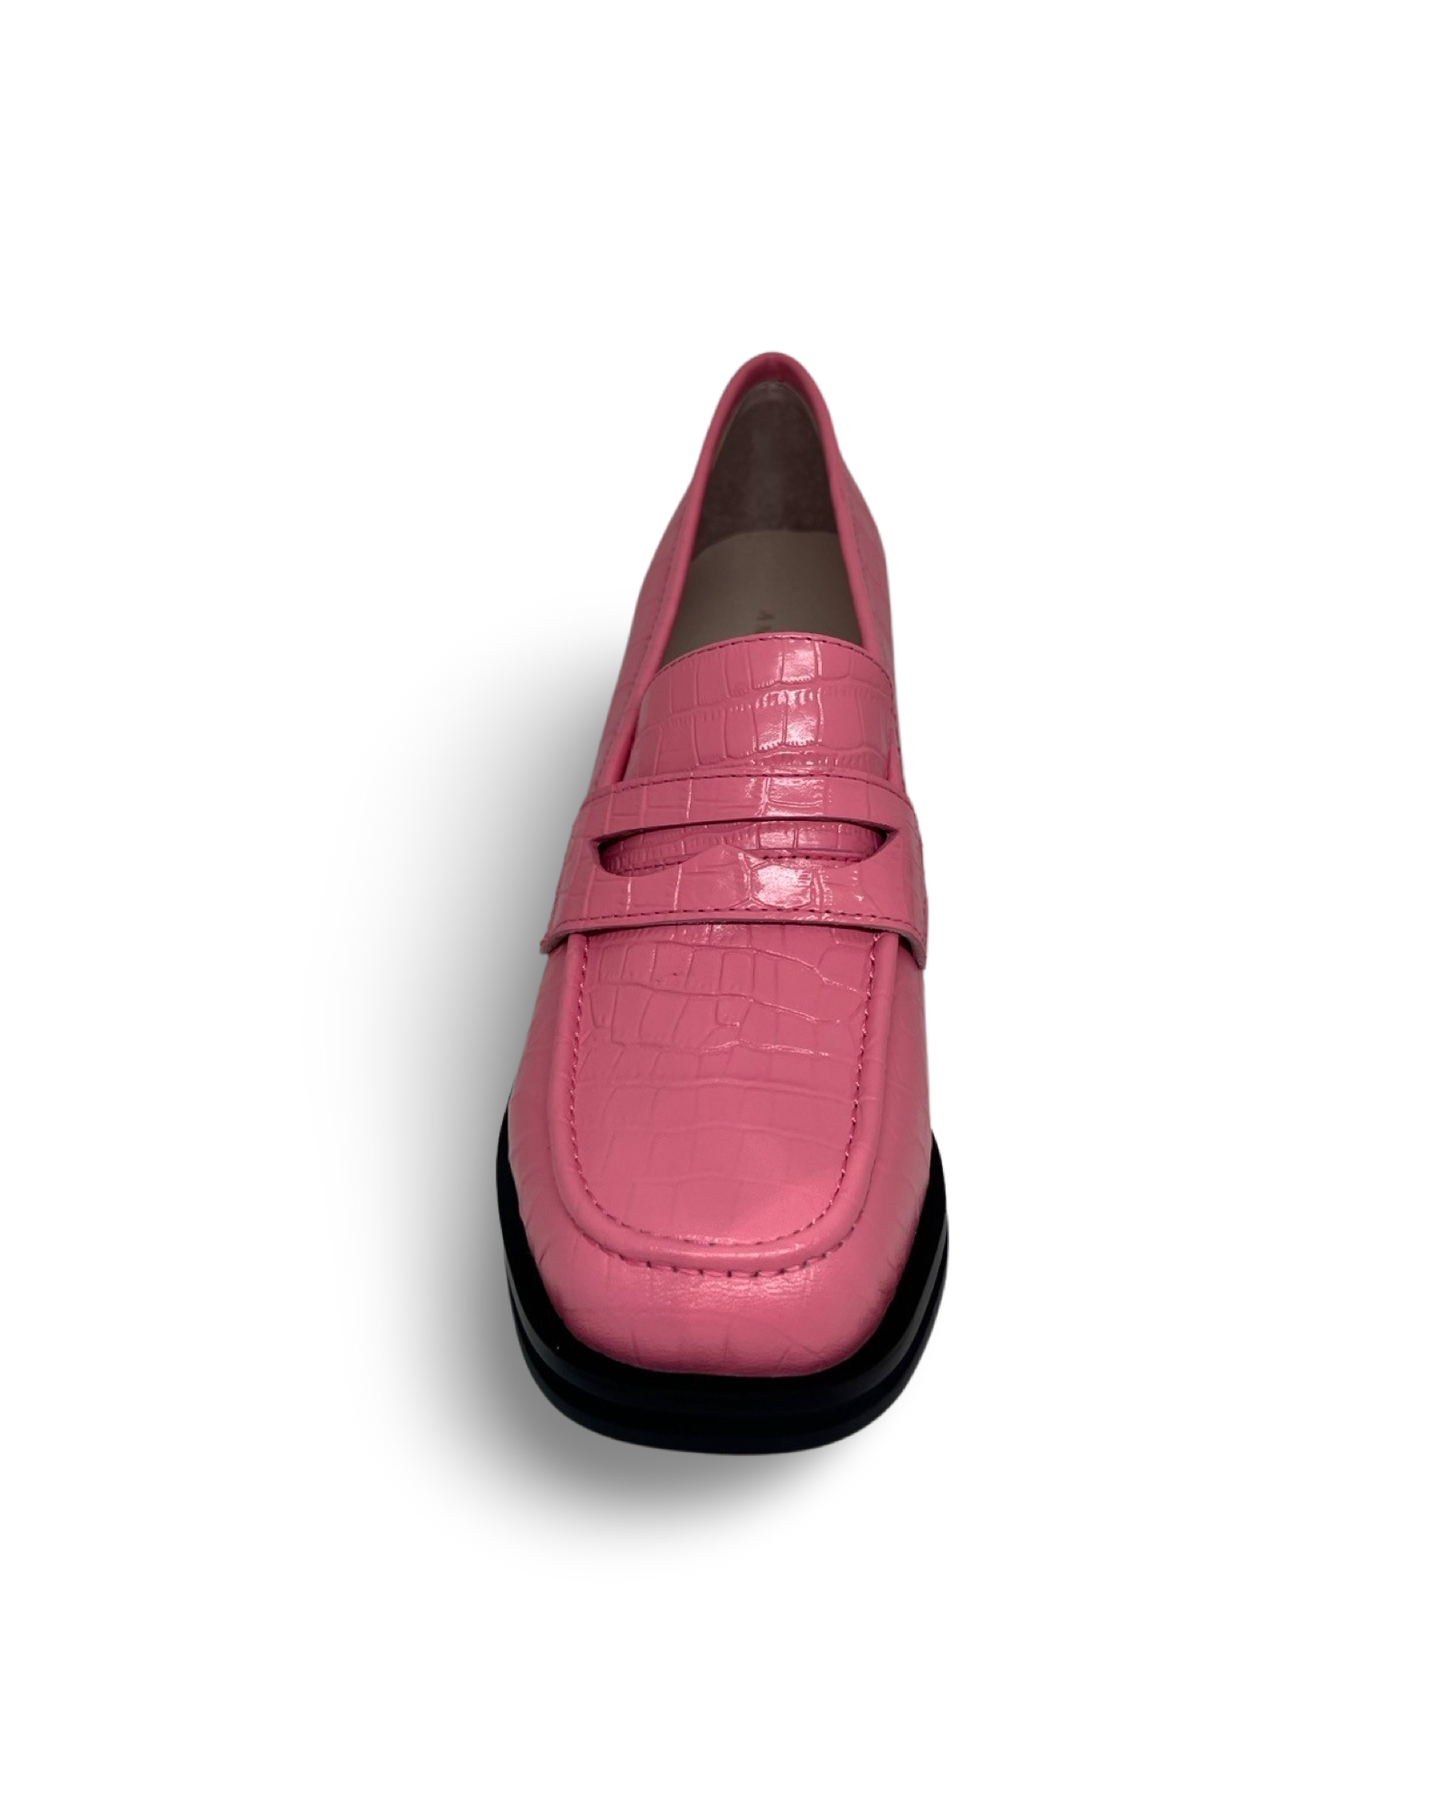 Holly Loafer By Andrea Biani - Pink Croc